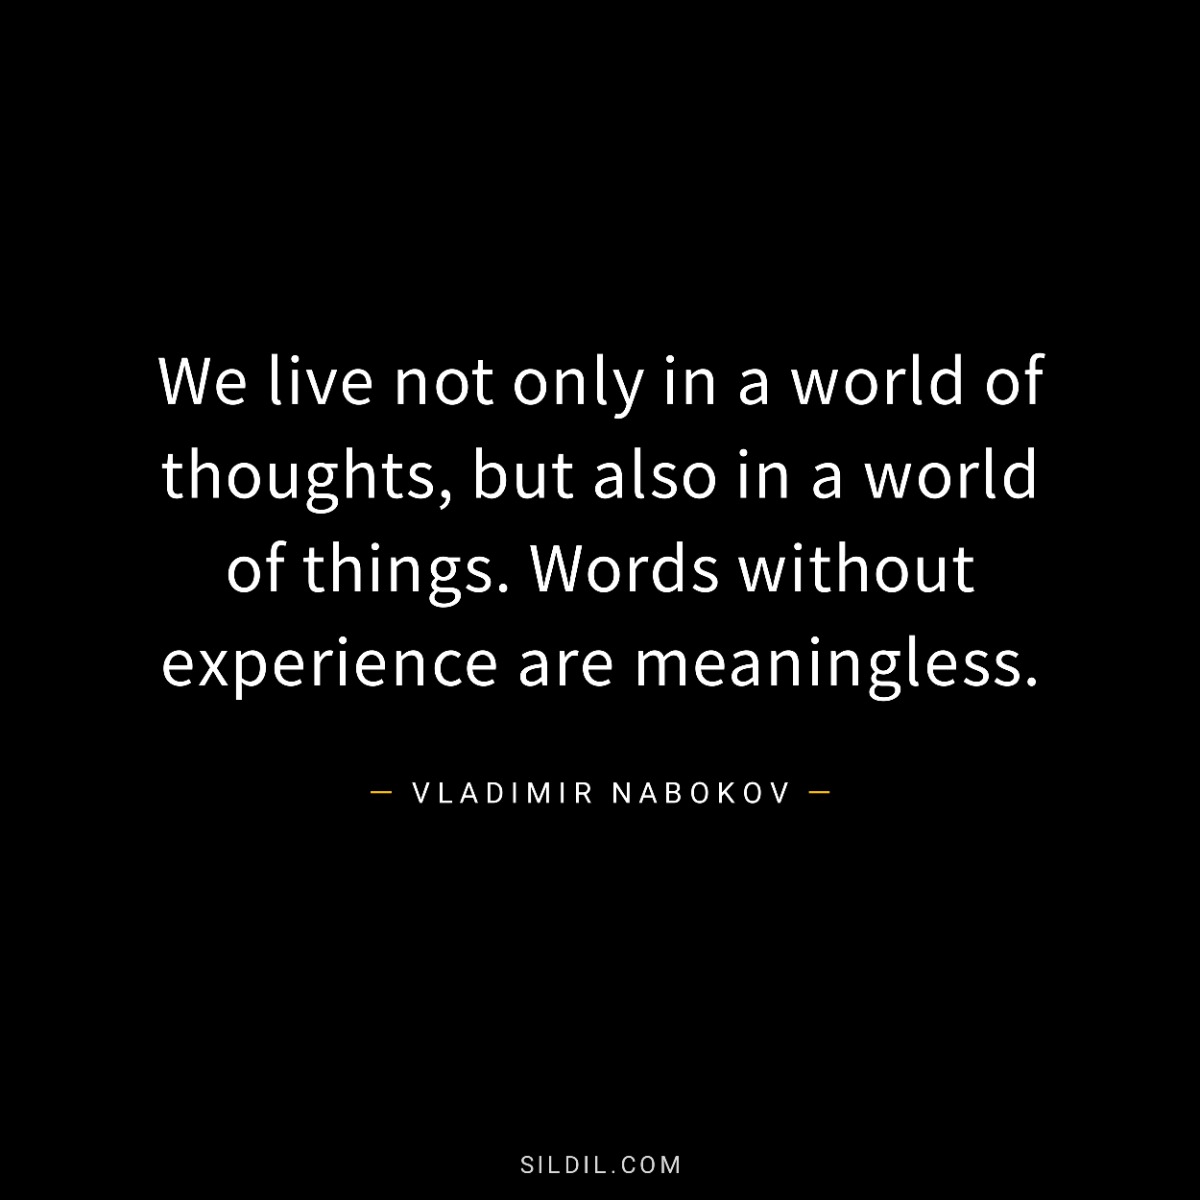 We live not only in a world of thoughts, but also in a world of things. Words without experience are meaningless.